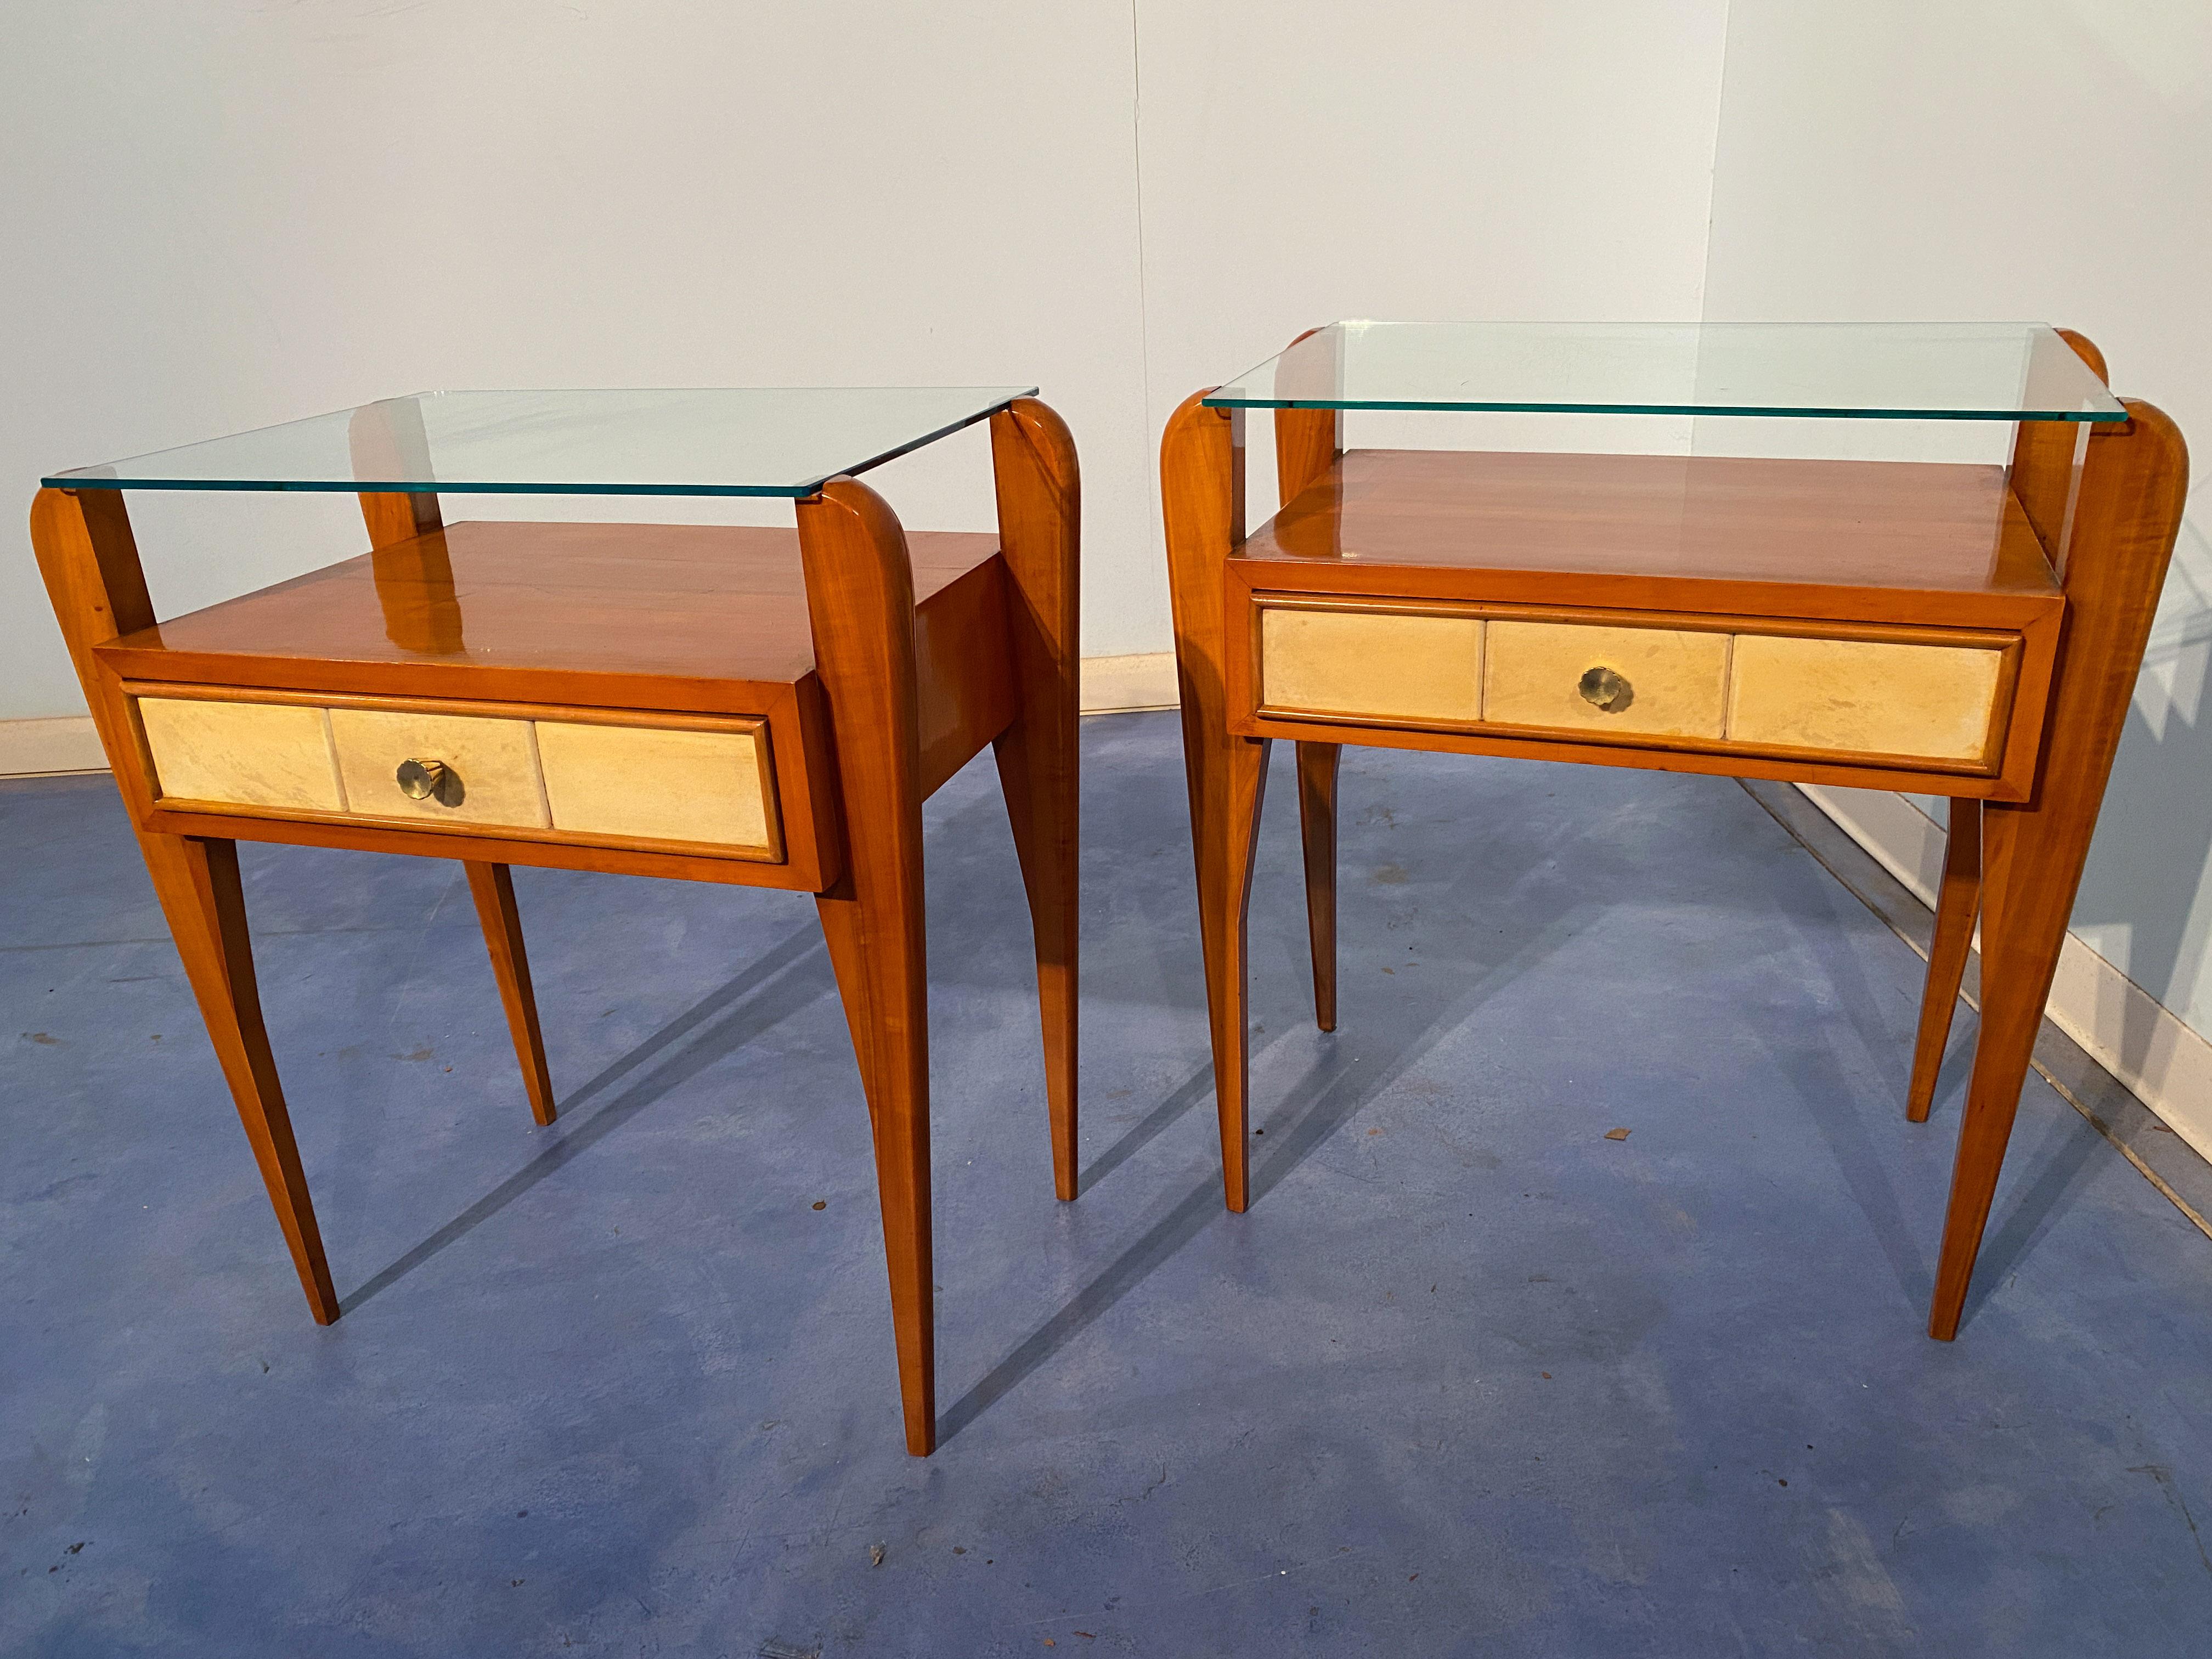 Italian Mid-Century Parchment Bedside or Nightstands by Osvaldo Borsani, 1950 For Sale 8